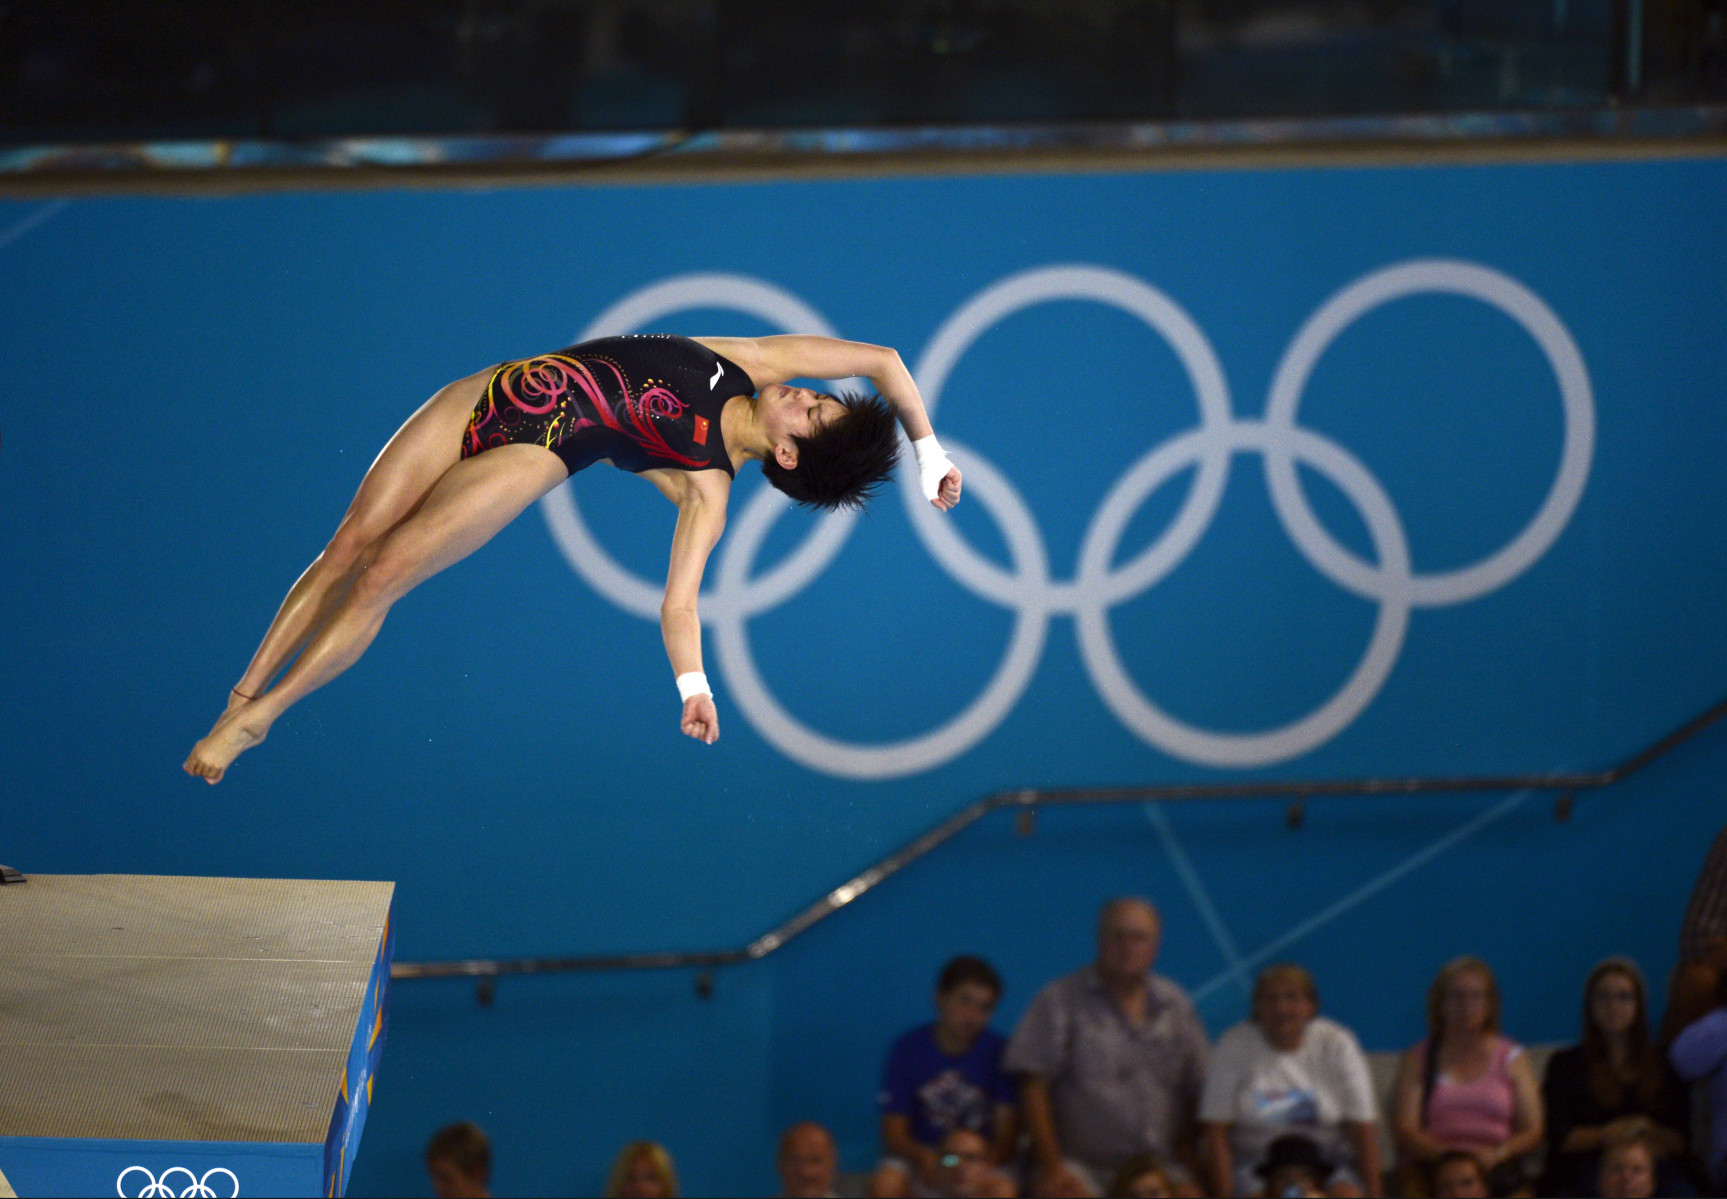 China's Chen Ruolin on her way to winning the gold medal in the women's 10 Meter Platform competition.  : London Olympics : Photography by Adam Stoltman: Sports Photography, The Arts, Portraiture, Travel, Photojournalism and Fine Art in New York